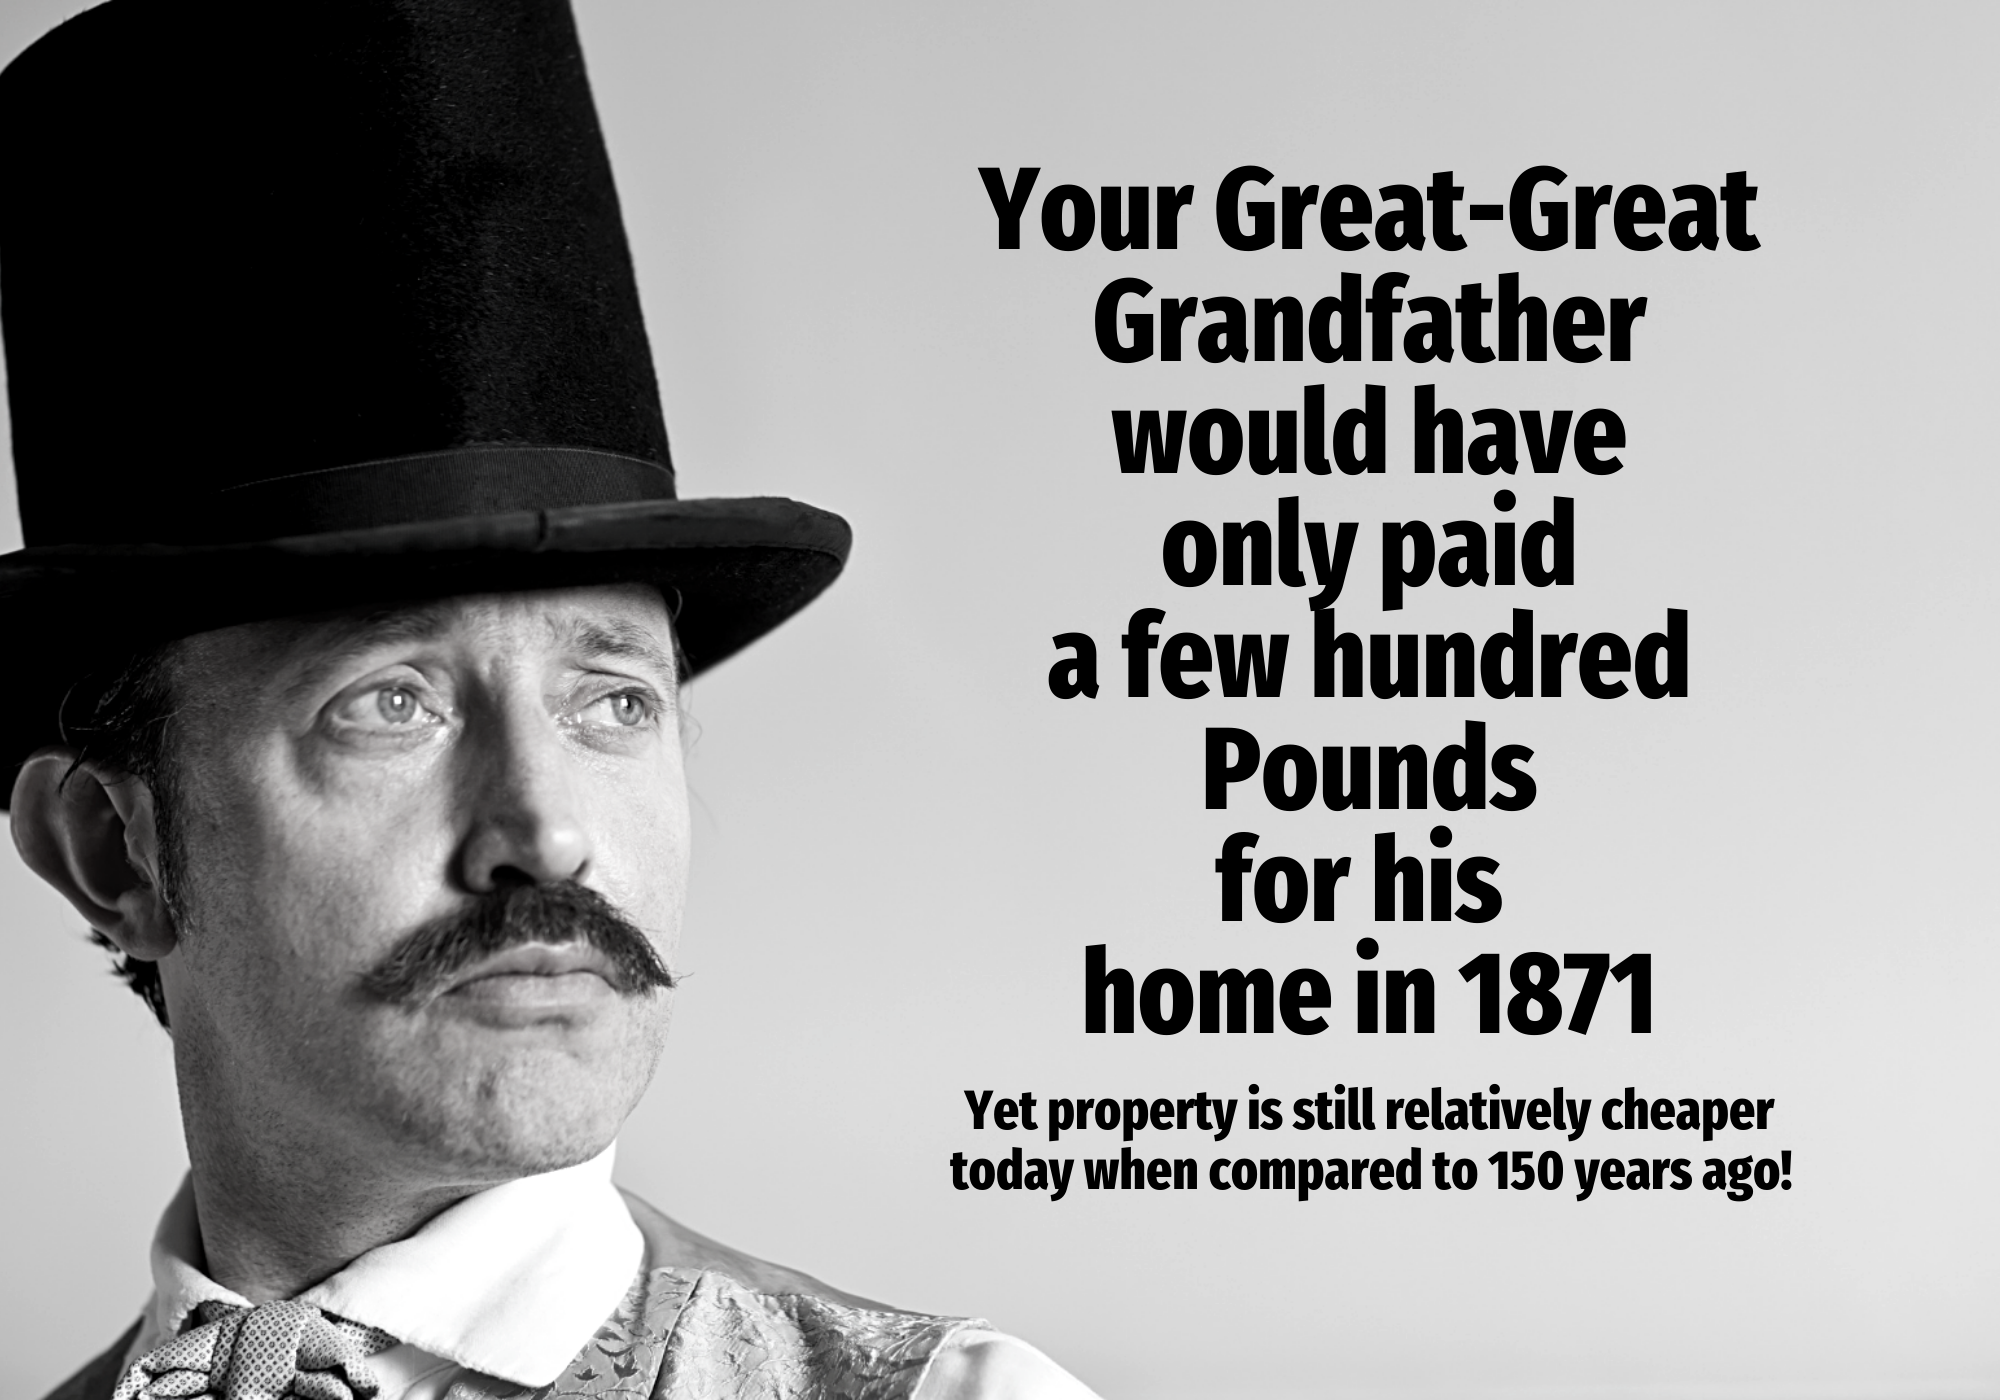 YOUR GREAT-GREAT ISLEWORTH GRANDFATHER WOULD HAVE ONLY PAID £582 2S 12D FOR HIS ISLEWORTH HOME IN 1871